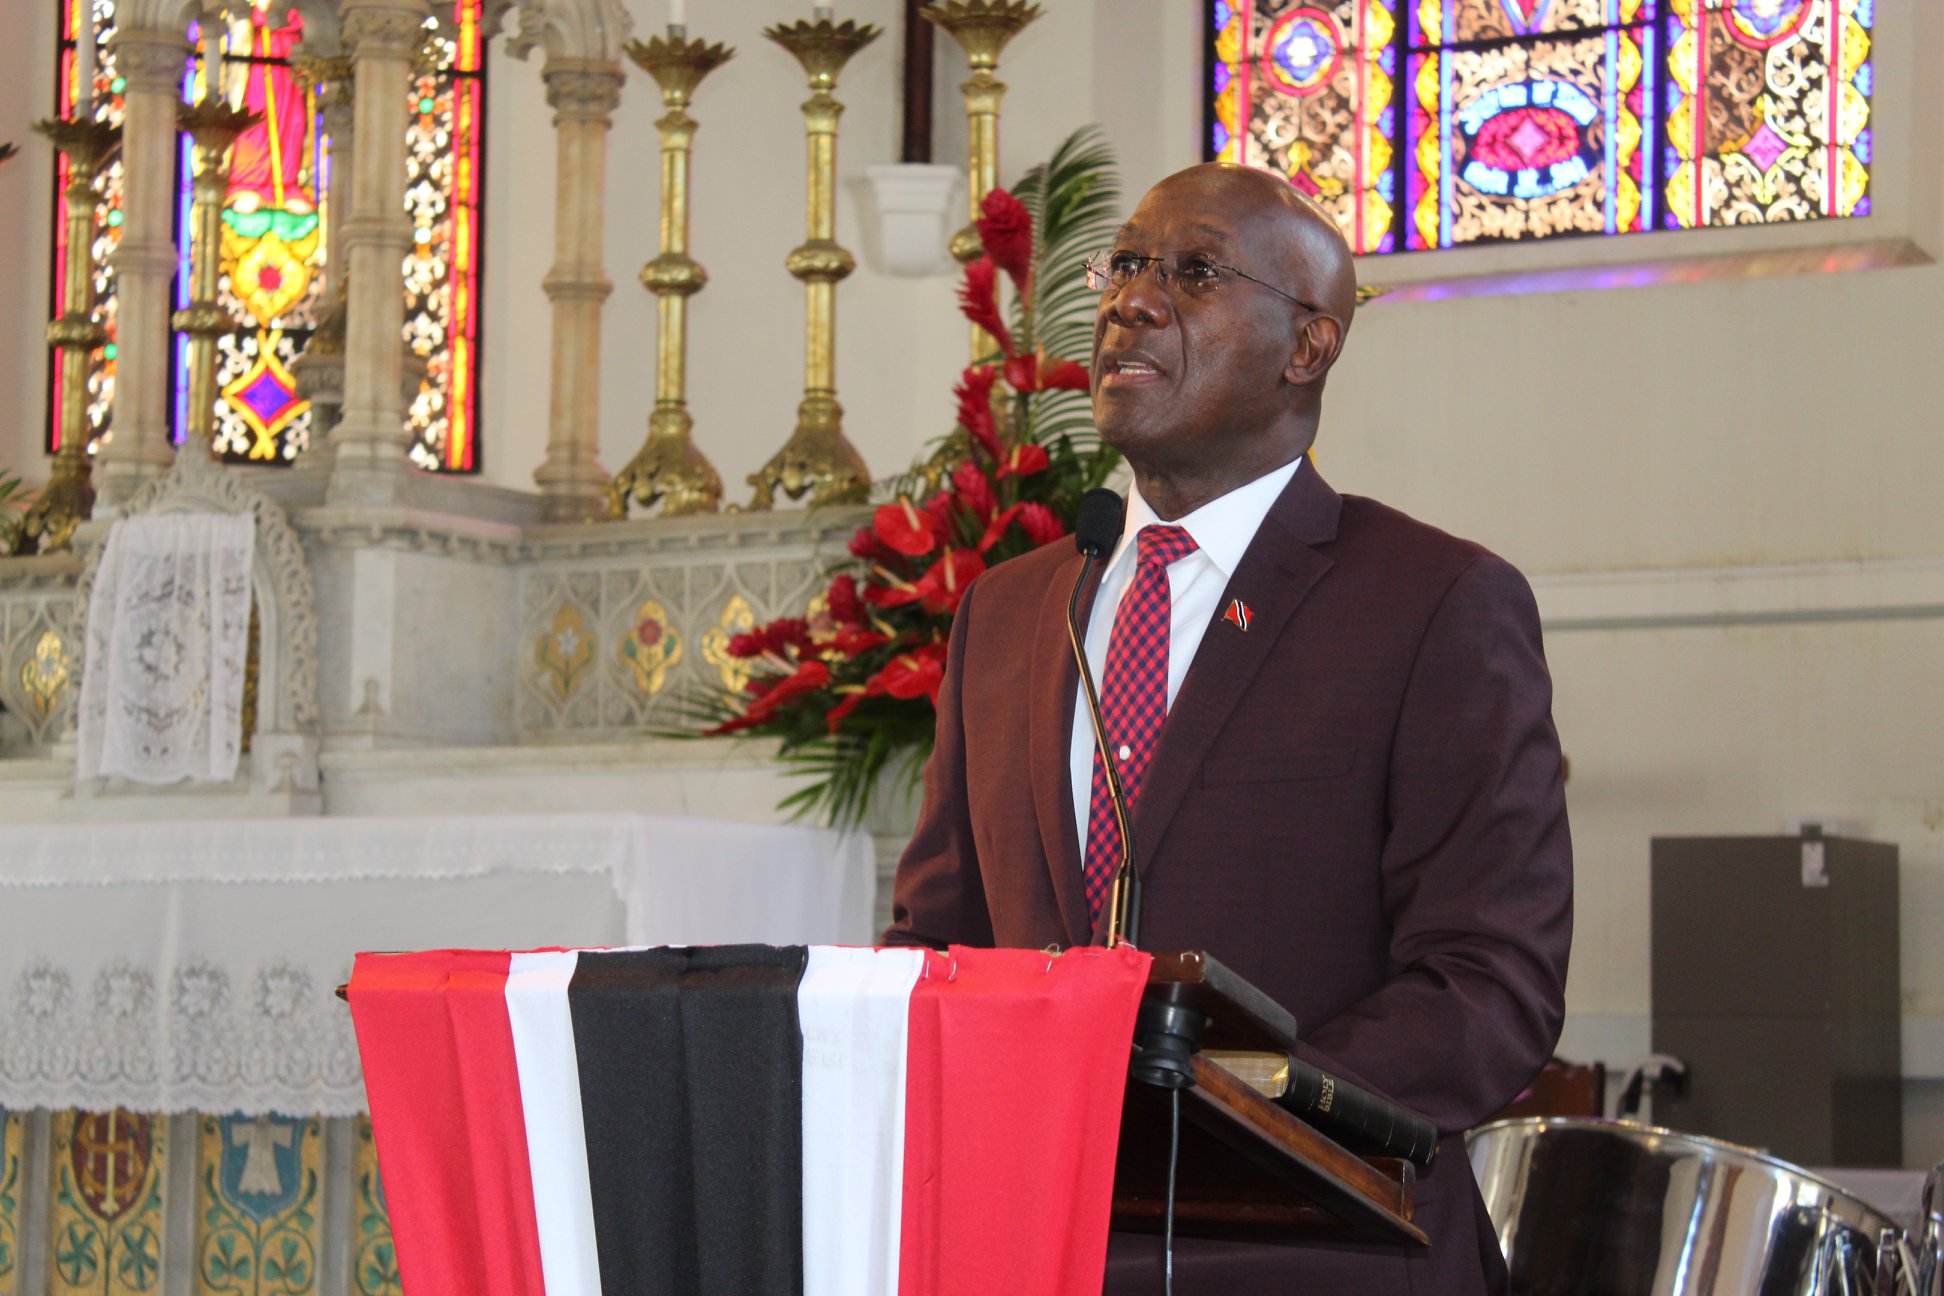 Dr. Rowley wants citizens to be their brothers’ keeper in his Good Friday message